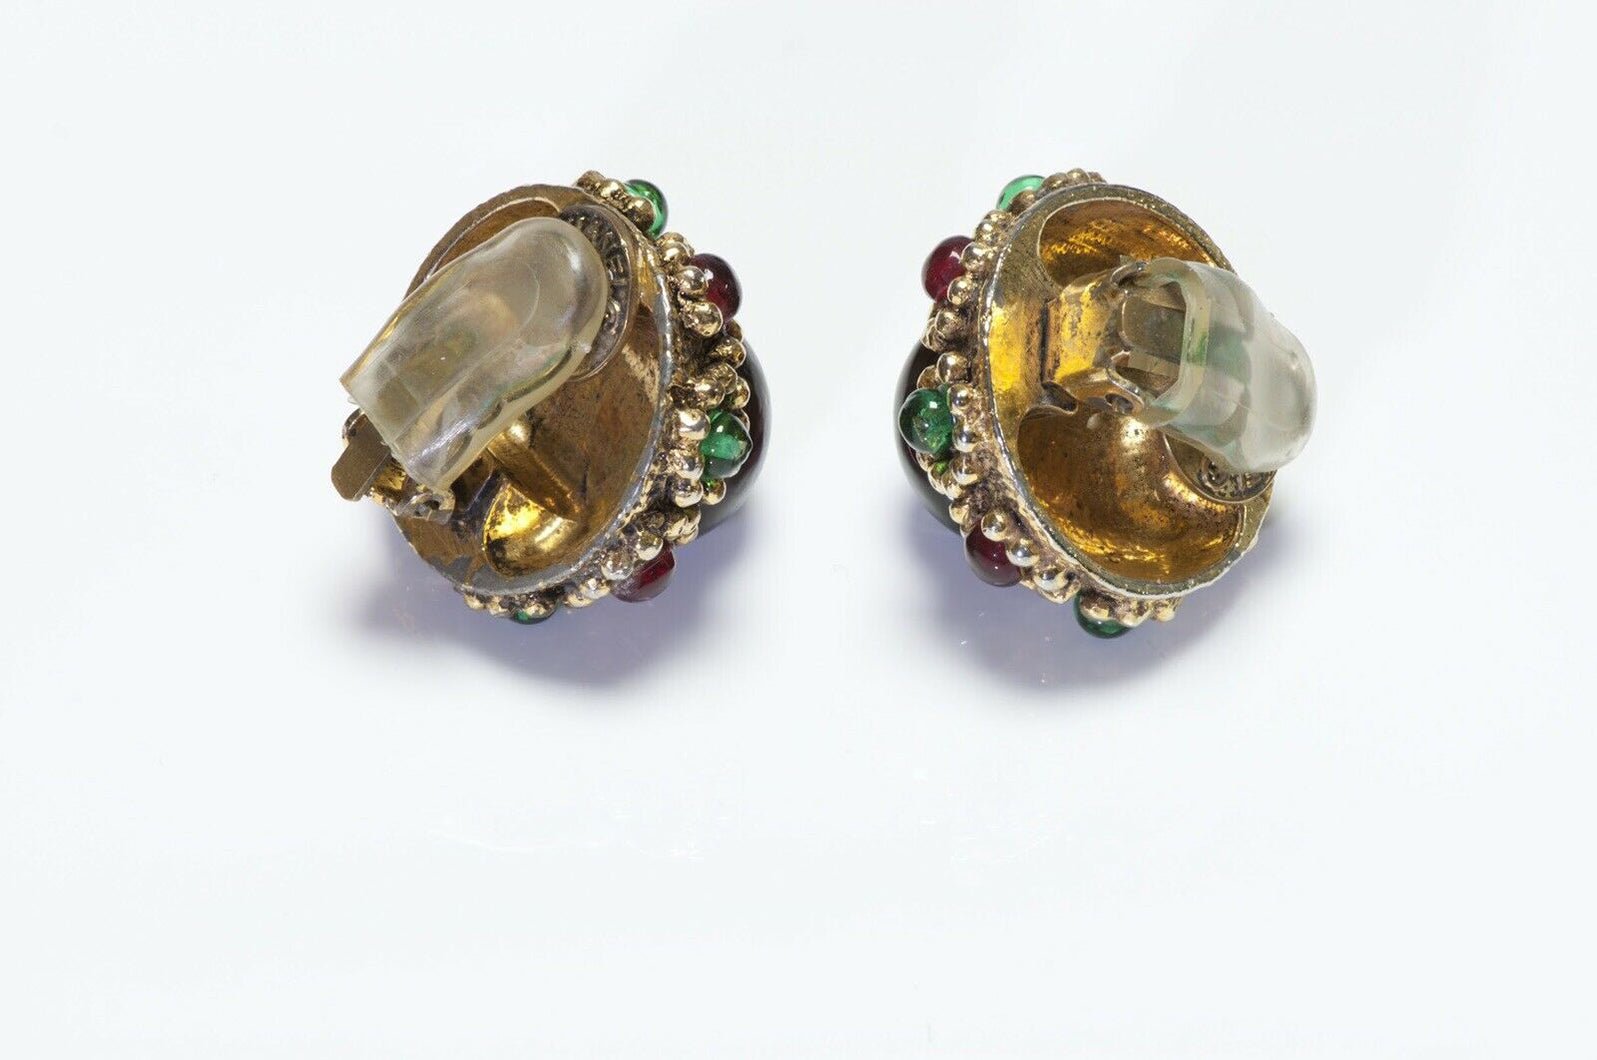 CHANEL Gripoix 1985 Red Green Poured Glass Earrings